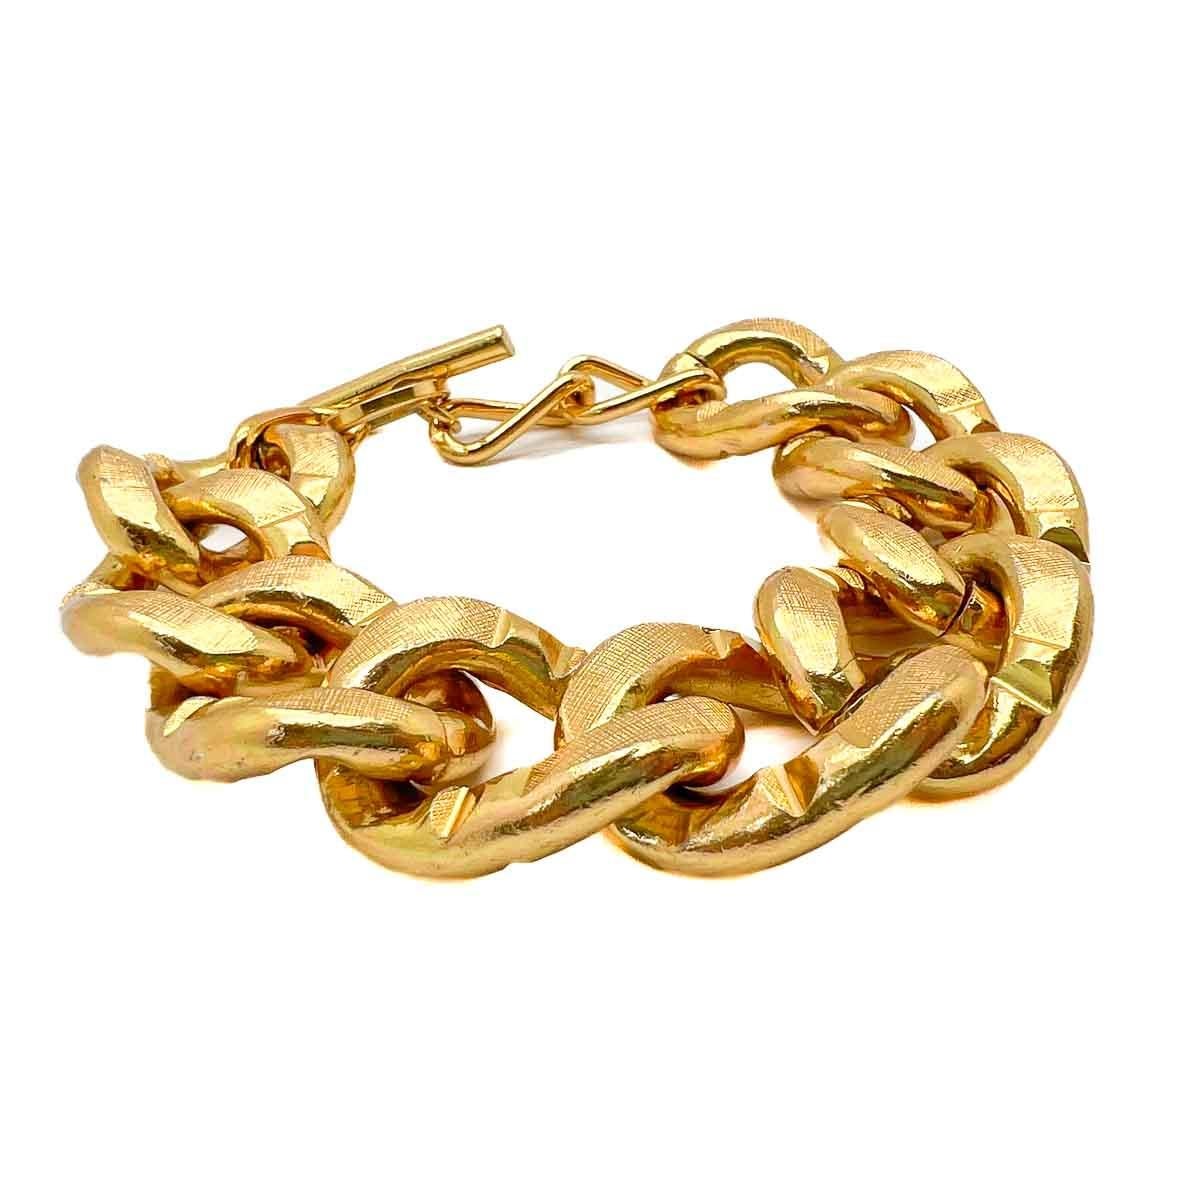 A Vintage Chunky Textured Curb Bracelet. Fabulous grand links to wrap around the wrist, finished to perfection with textured patterning. A timeless classic.

An unsigned beauty. A rare treasure. Just because a jewel doesn’t carry a designer name,